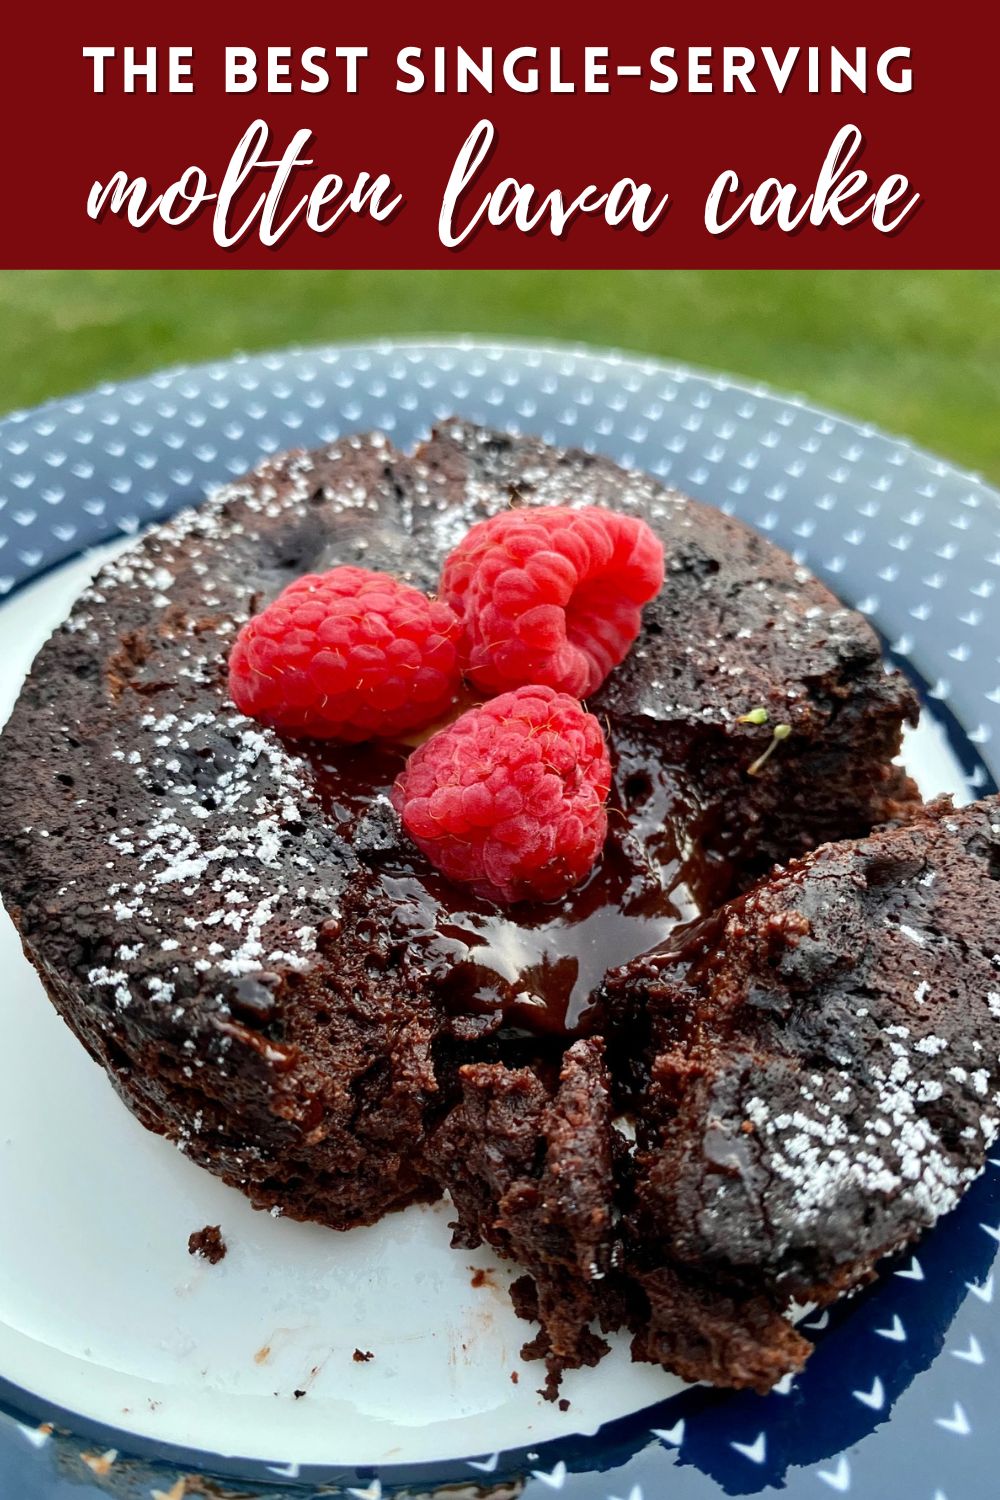 The Best Single-Serving Chocolate Lava Cake | This single-serving molten lava cake is amazing, super easy (15 minutes!), naturally gluten-free, & delicious. Make this easy single-serve dessert any day of the week. Single-serving lava cake recipe! #singleserve #lavacake #chocolate #easydessert #gf #glutenfree